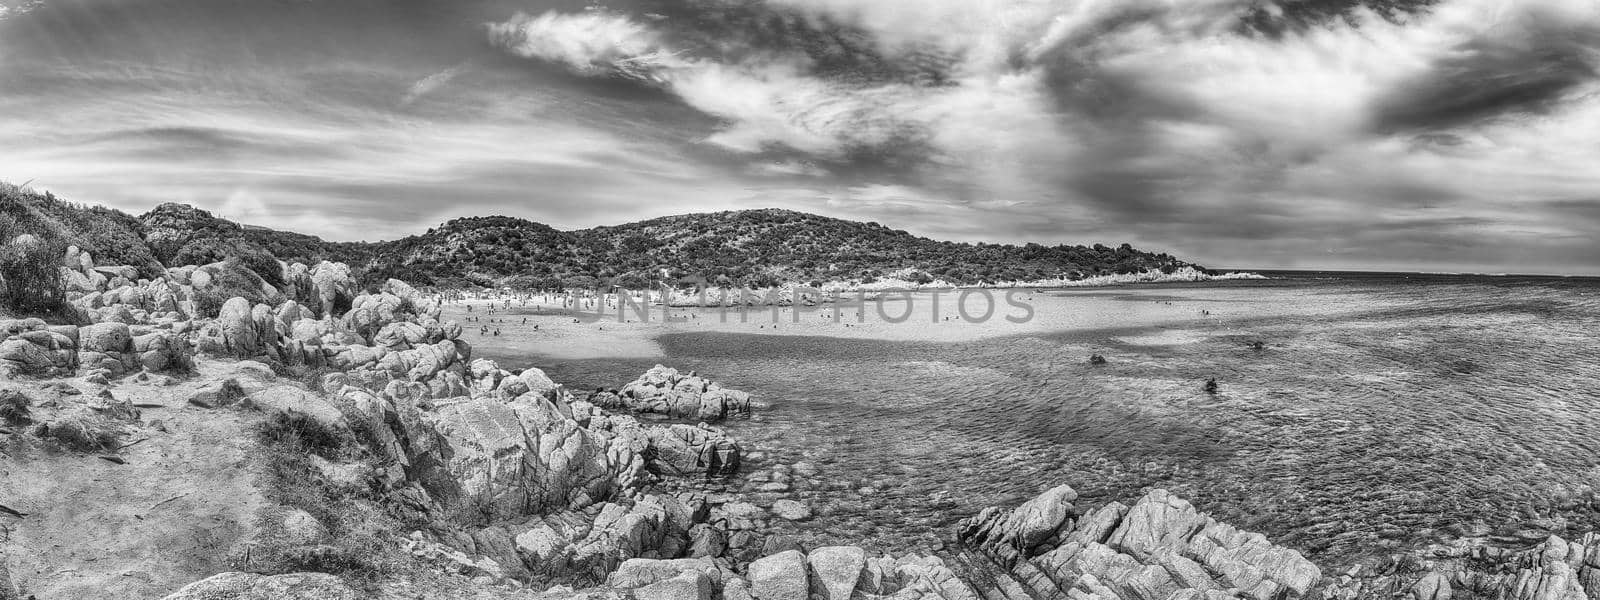 Panoramic view of the iconic Spiaggia del Principe, one of the most beautiful beaches in Costa Smeralda, Sardinia, Italy